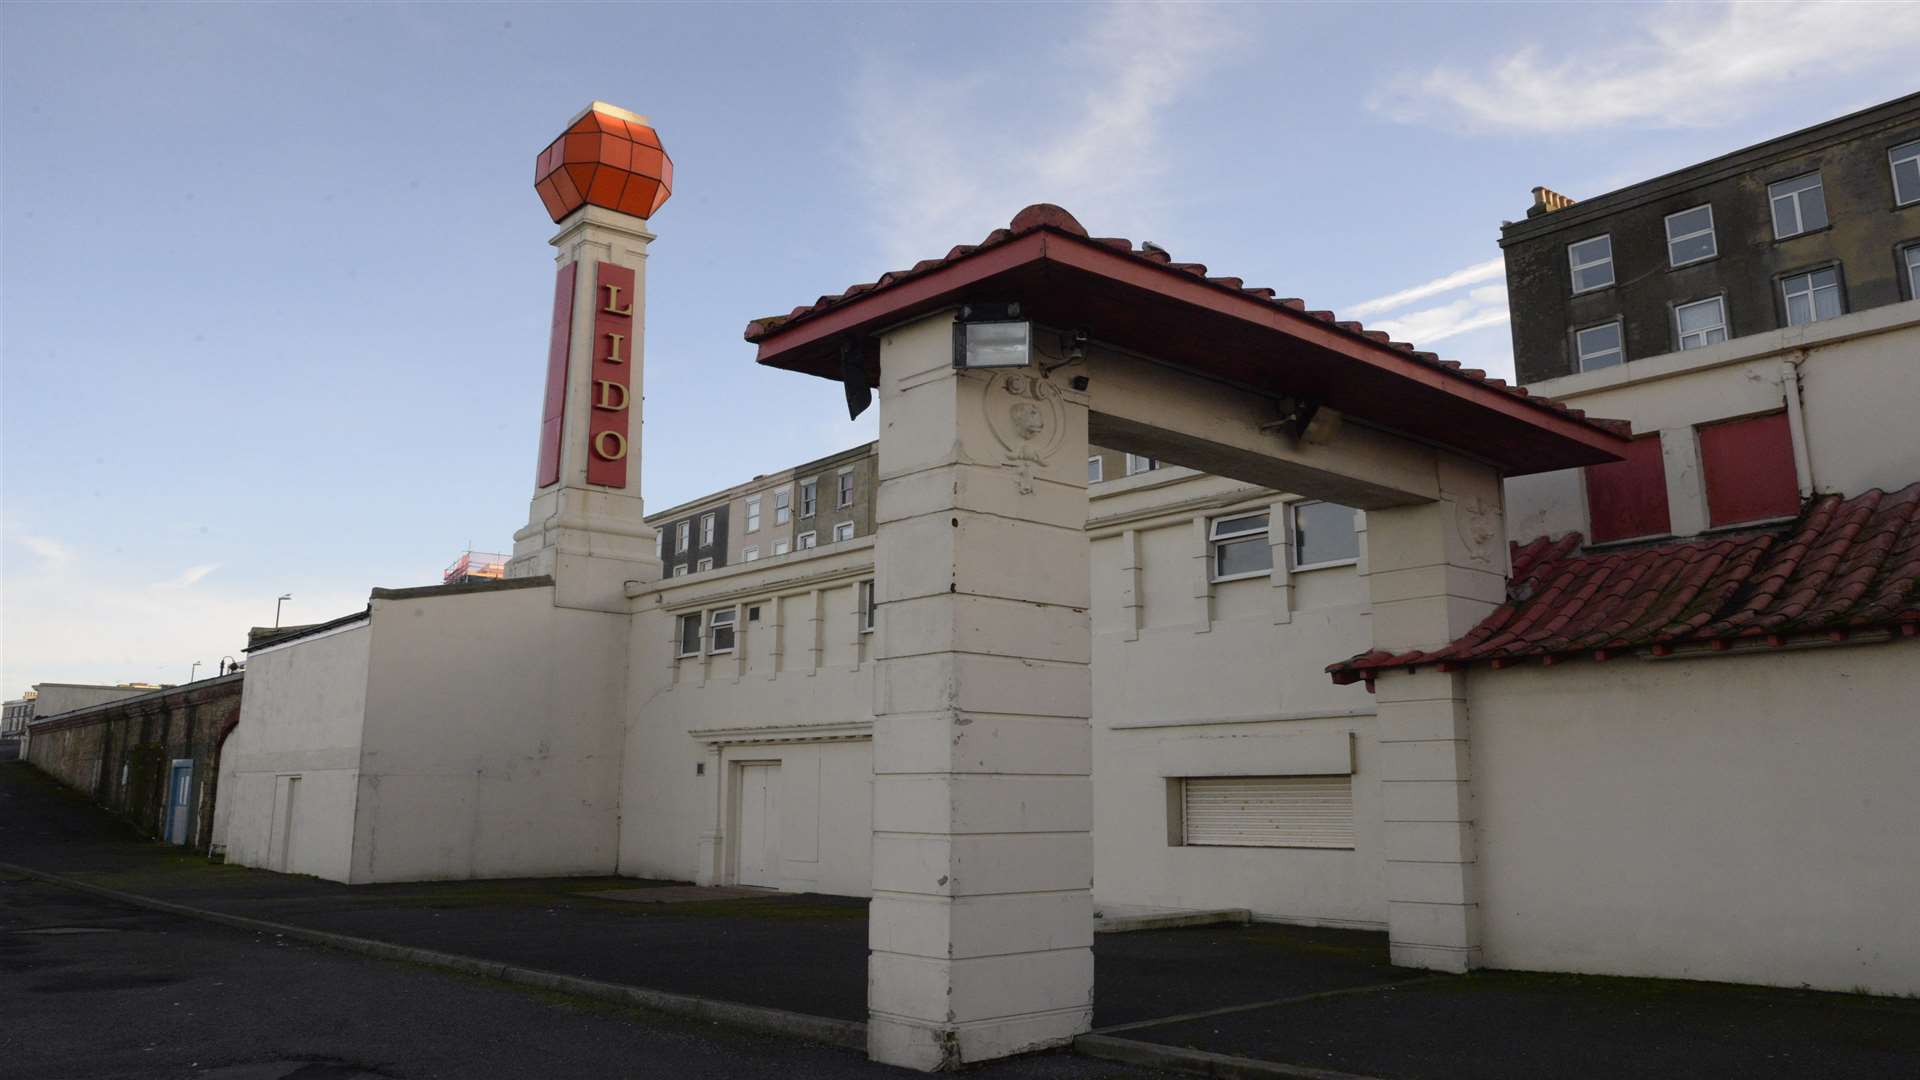 The Lido building has been put up for auction